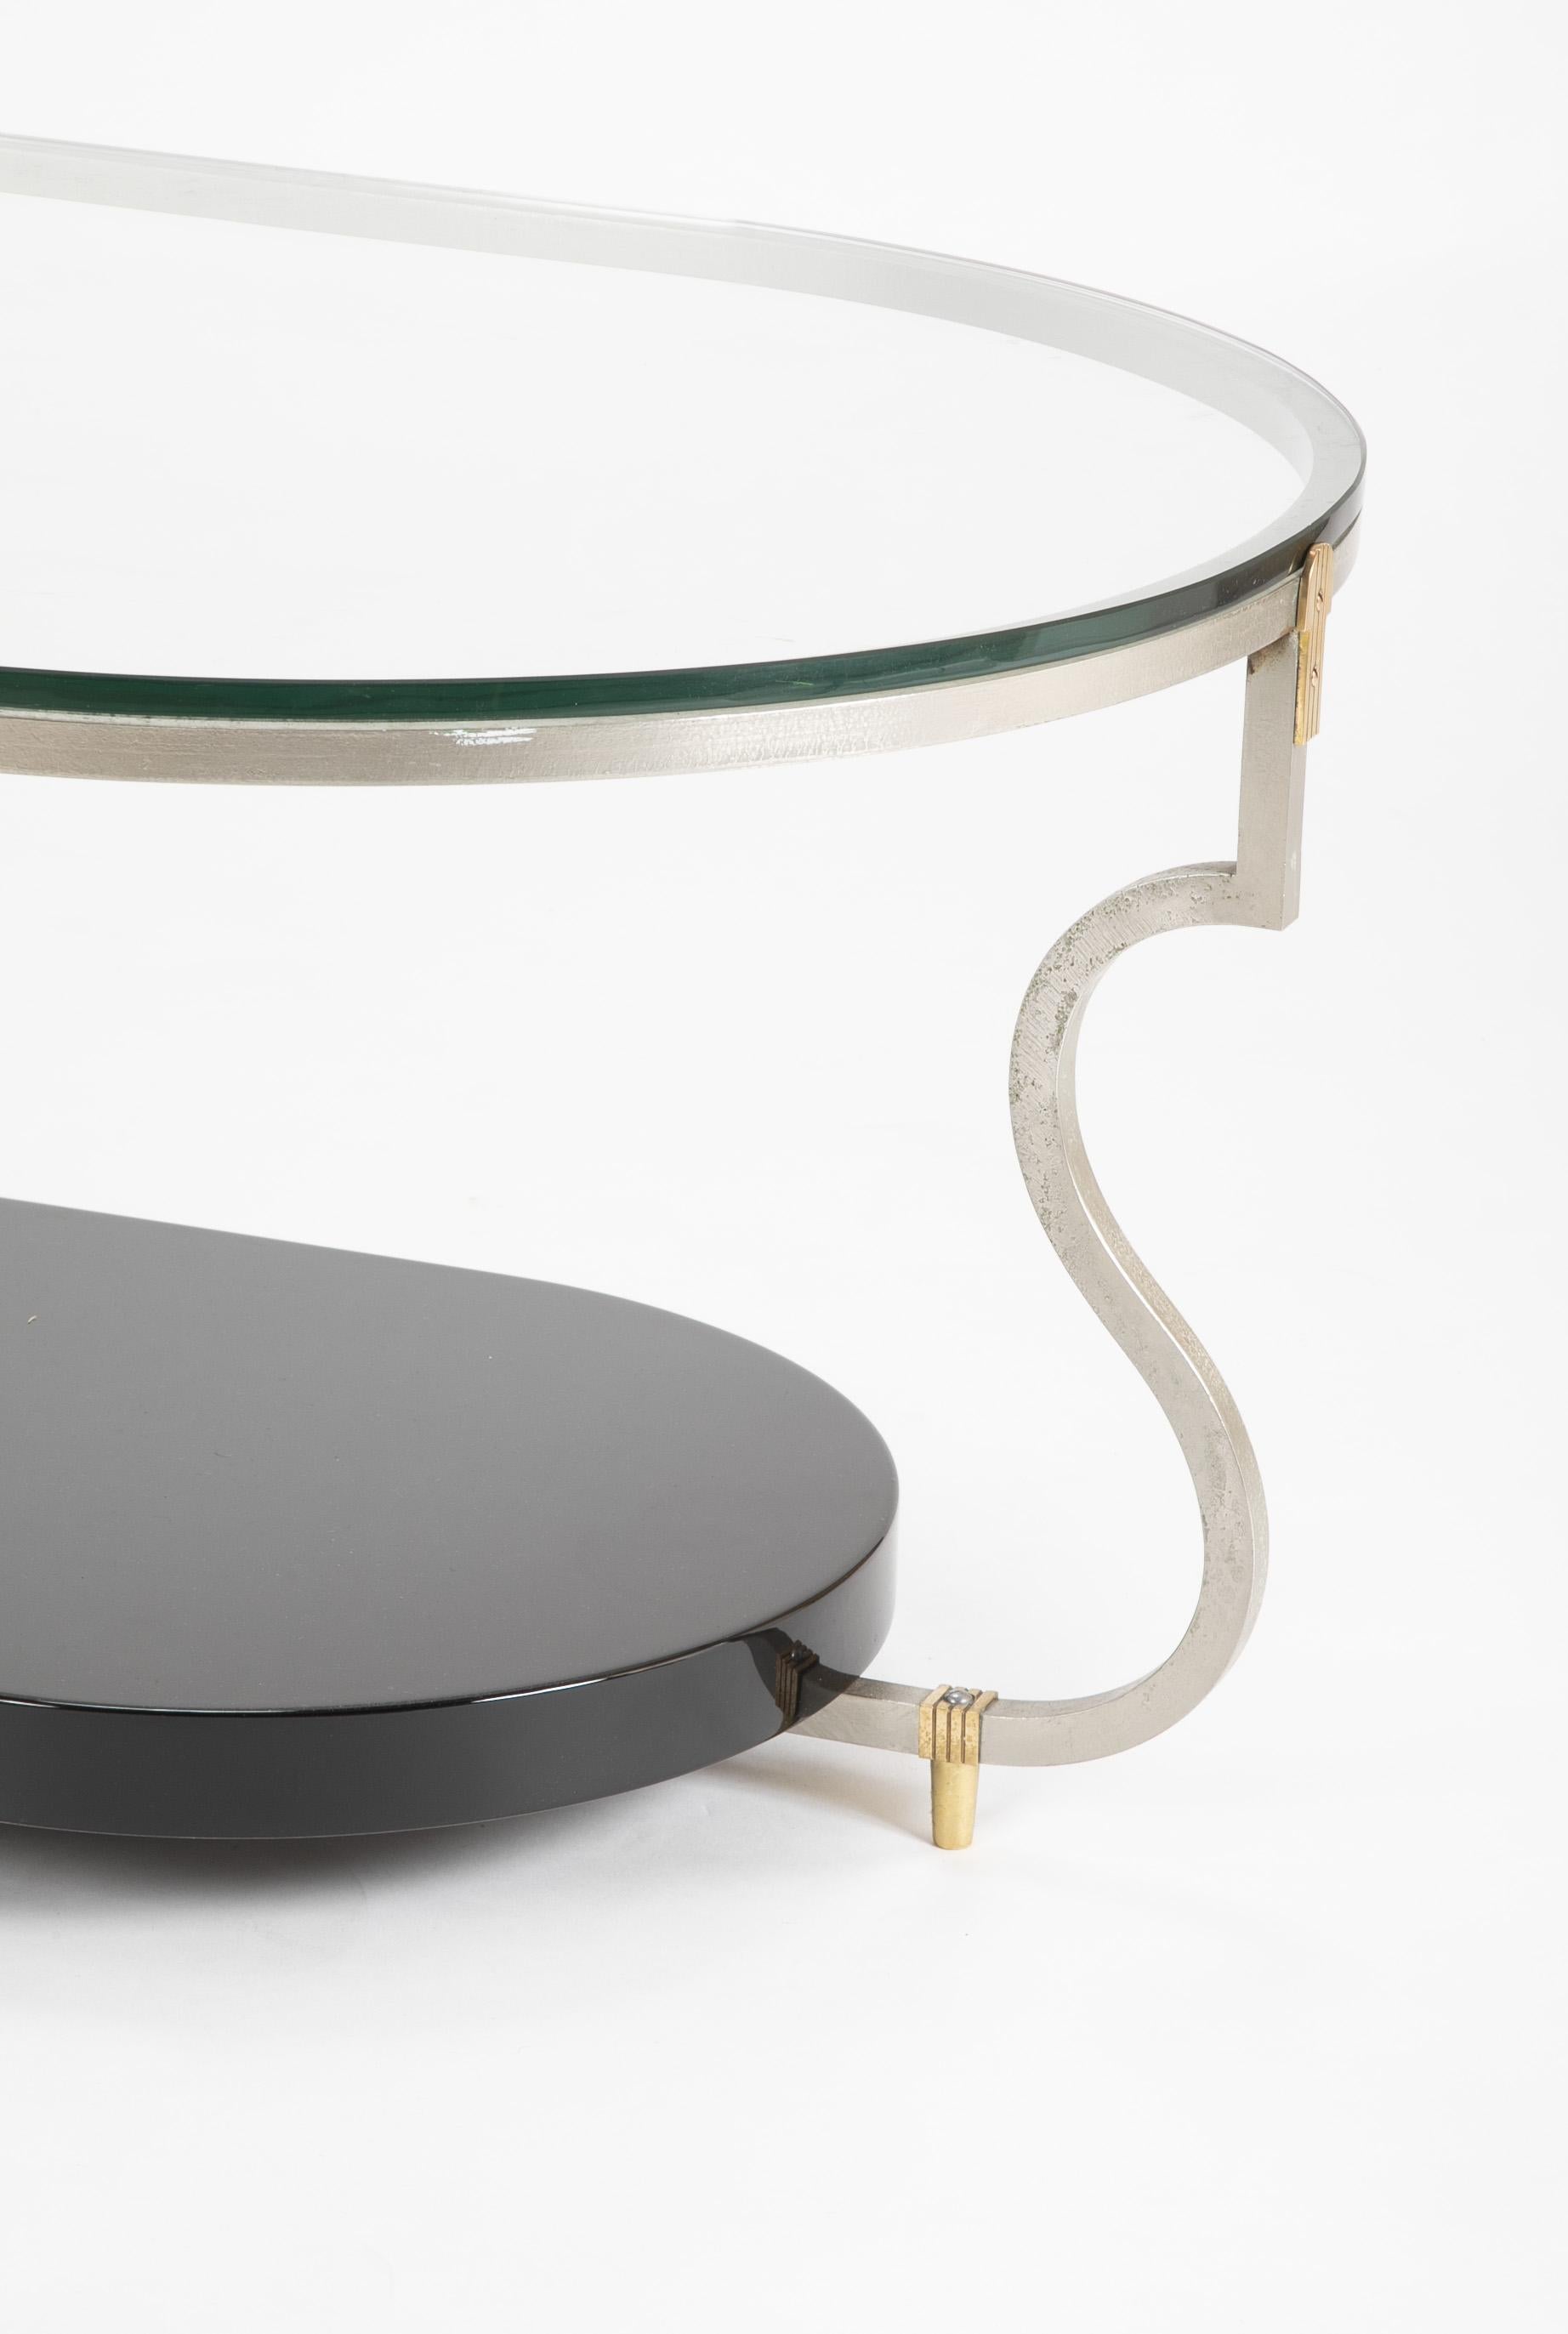 A black lacquer with glass, steel and brass coffee table designed by Tommi Parzinger. Fully restored.